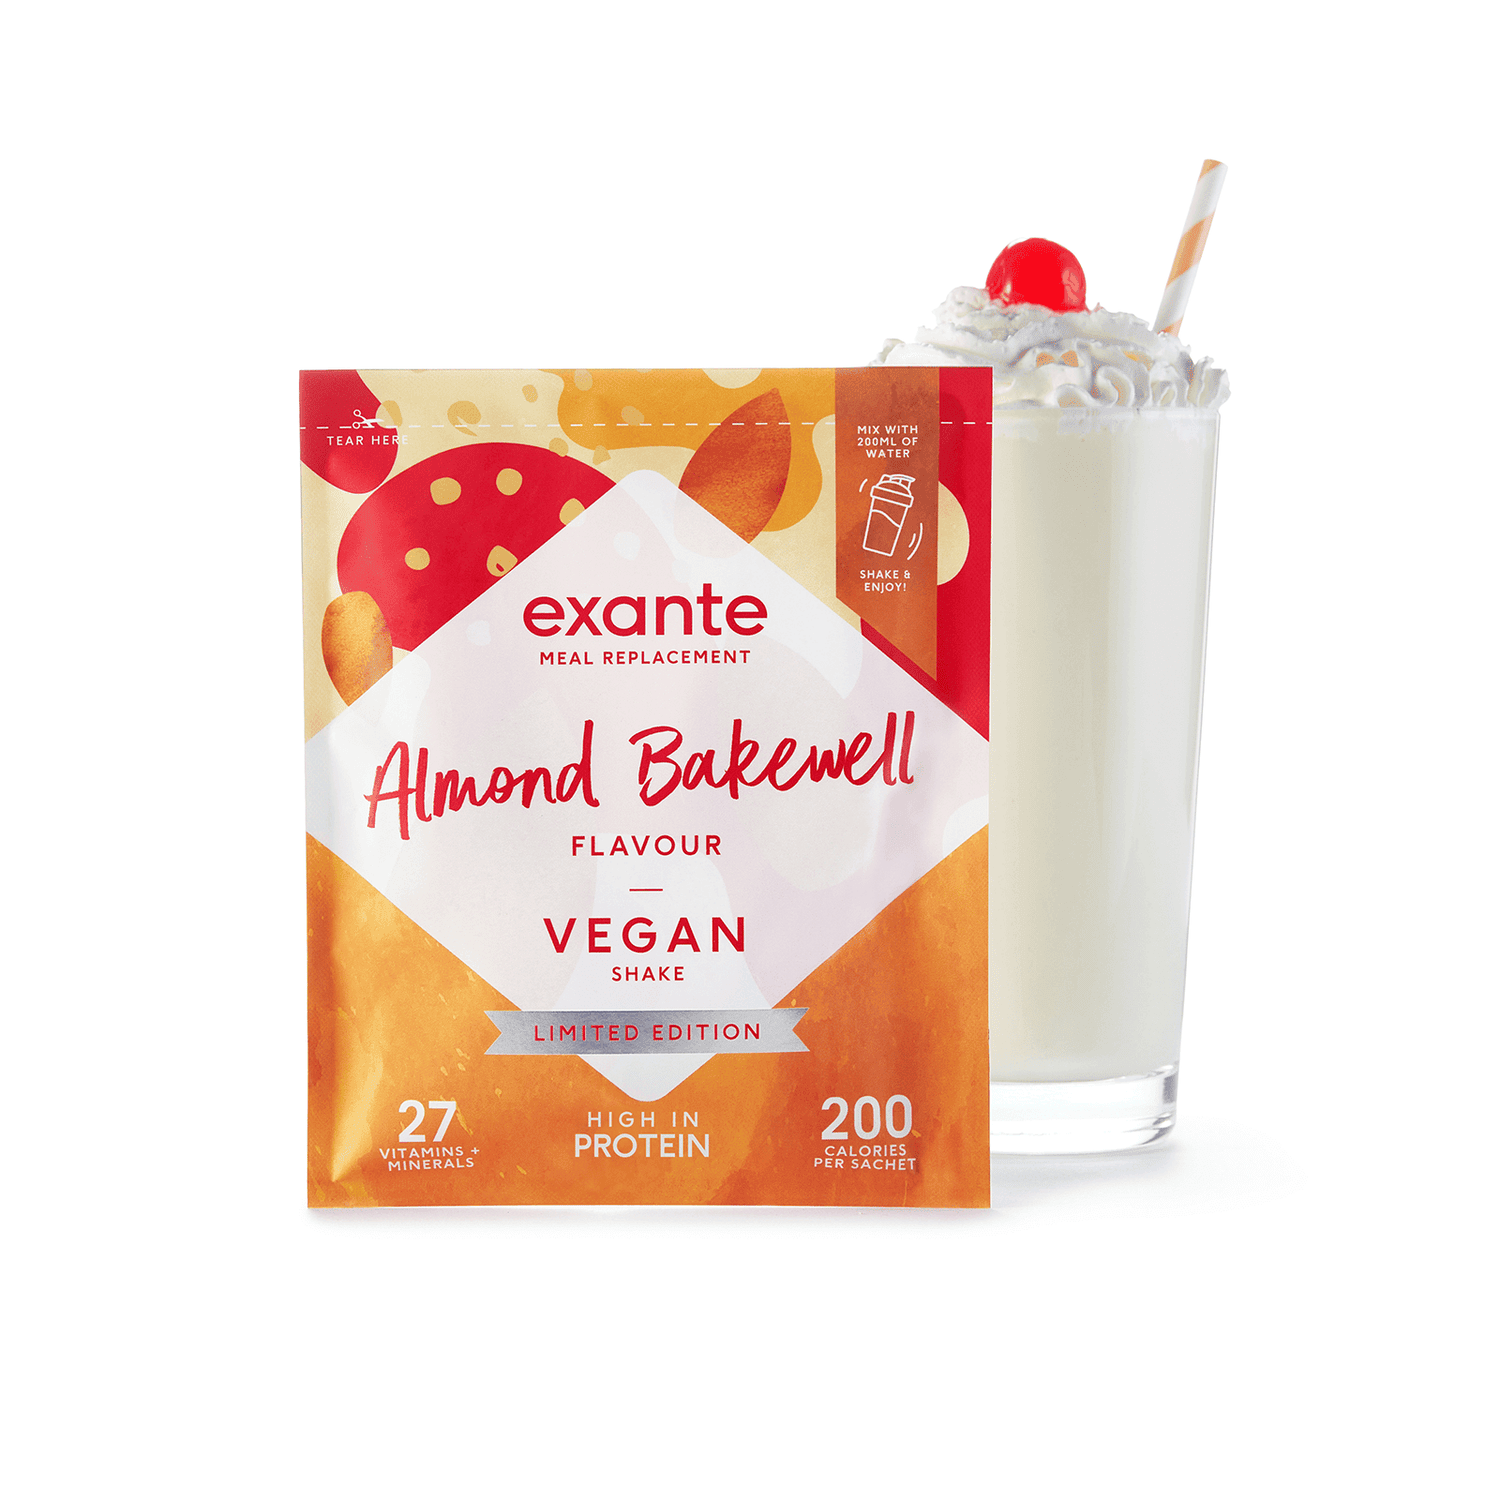 Vegan Meal Replacement Box of 7 Almond Bakewell Flavour Shake